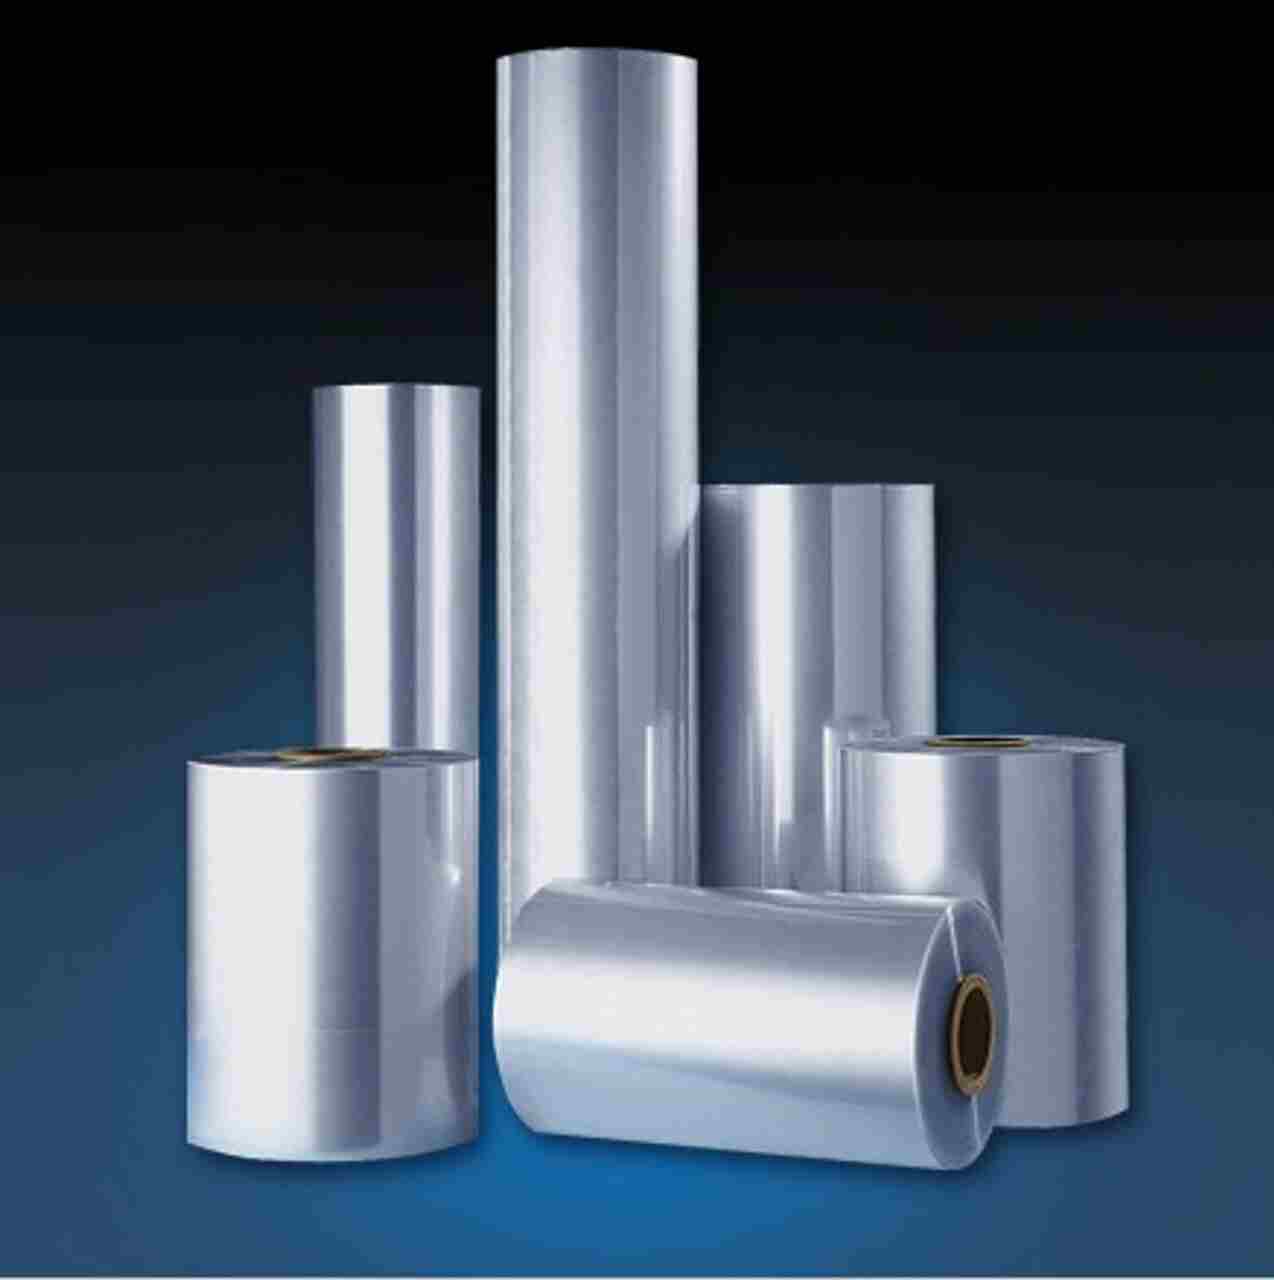 Premier POF Manufacturers for Quality Packaging Solutions